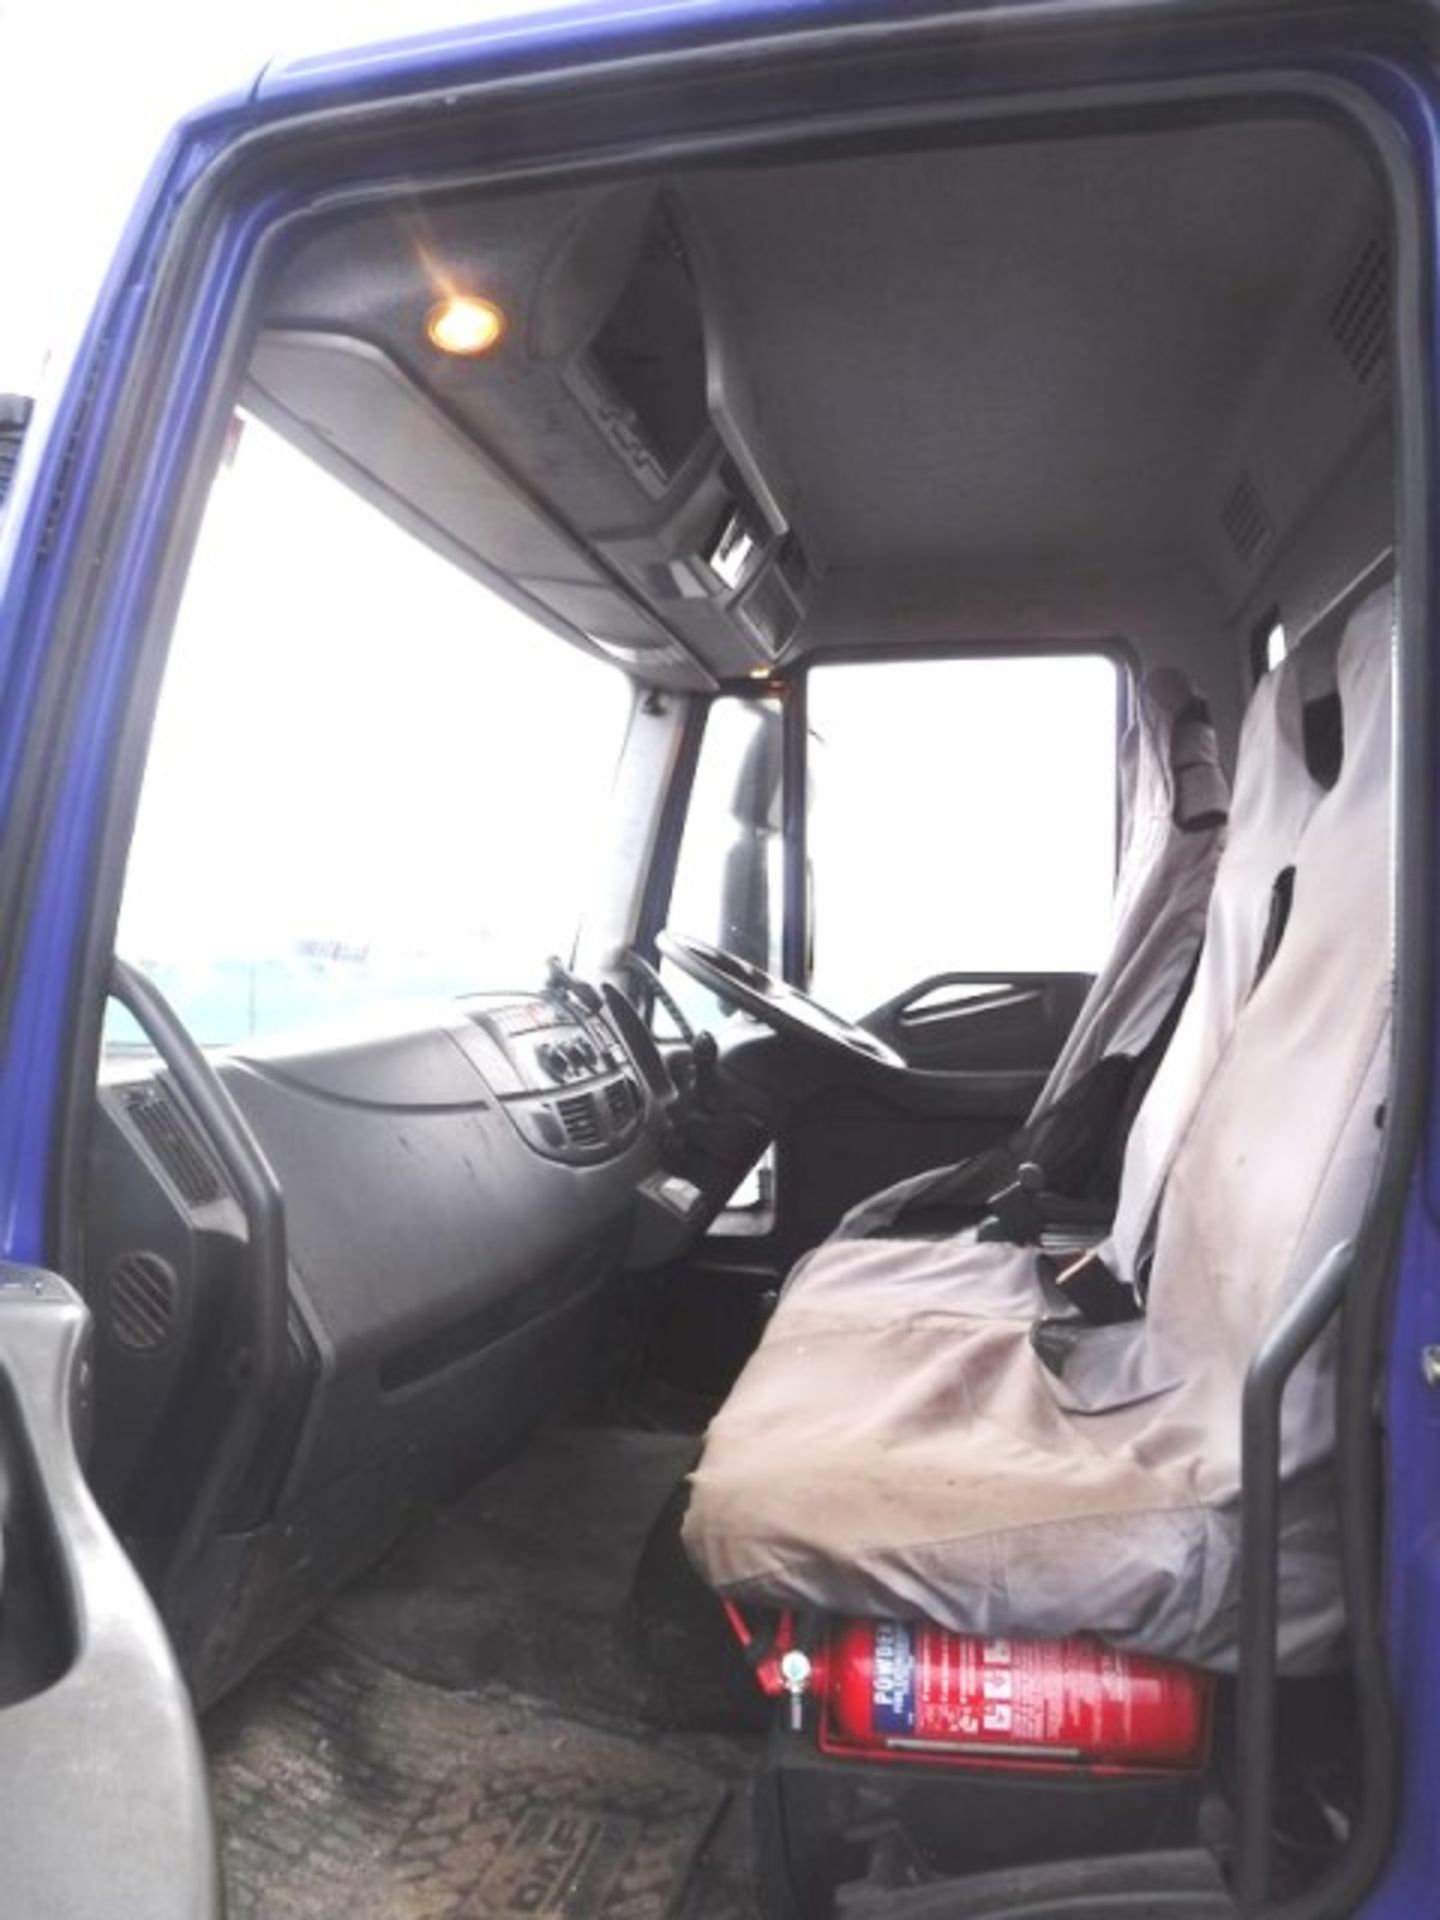 IVECO MODEL EUROCARGO (MY 2008) - 3920cc - Image 5 of 21